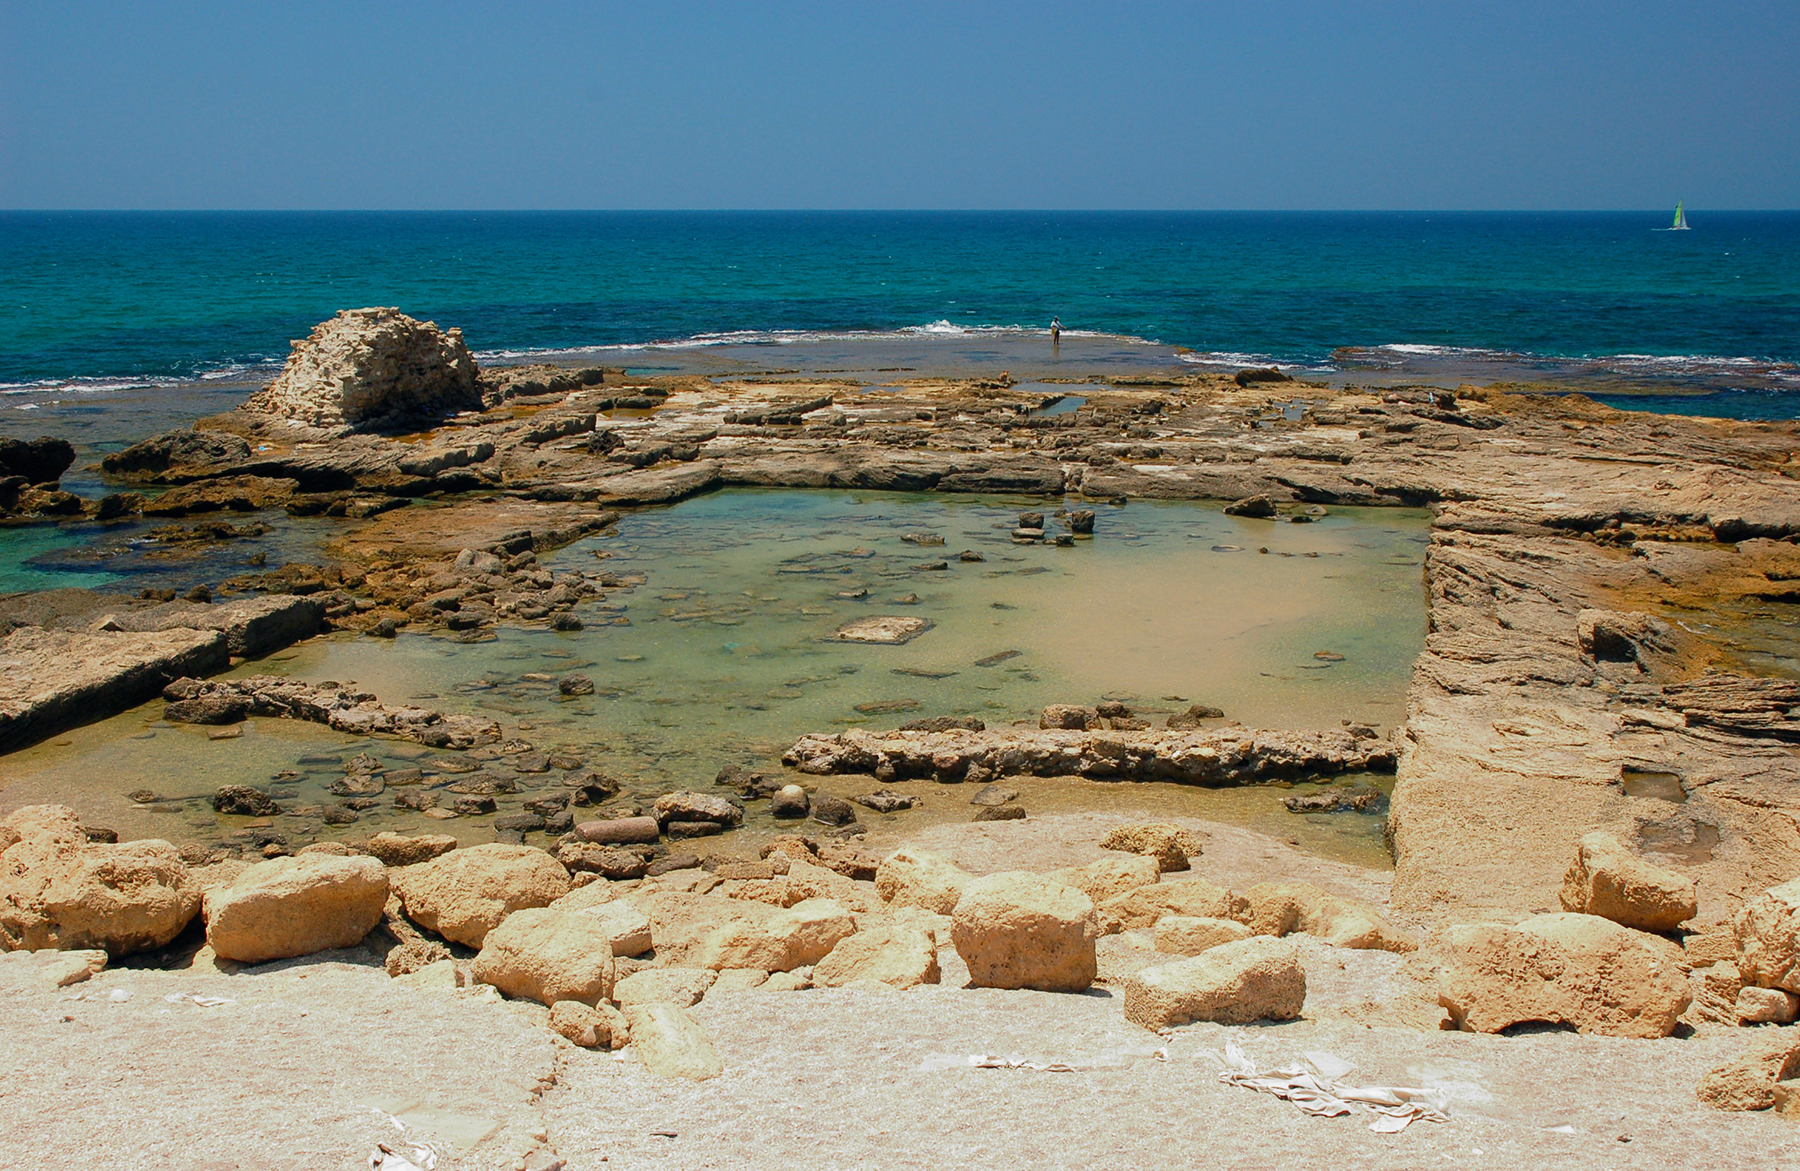 Roman concrete is so durable it can even withstand exposure to the ocean. The concrete in these Roman baths remains still exists despite being exposed to wind, rain, saltwater, and waves. (Image courtesy of Livioandronico2013)